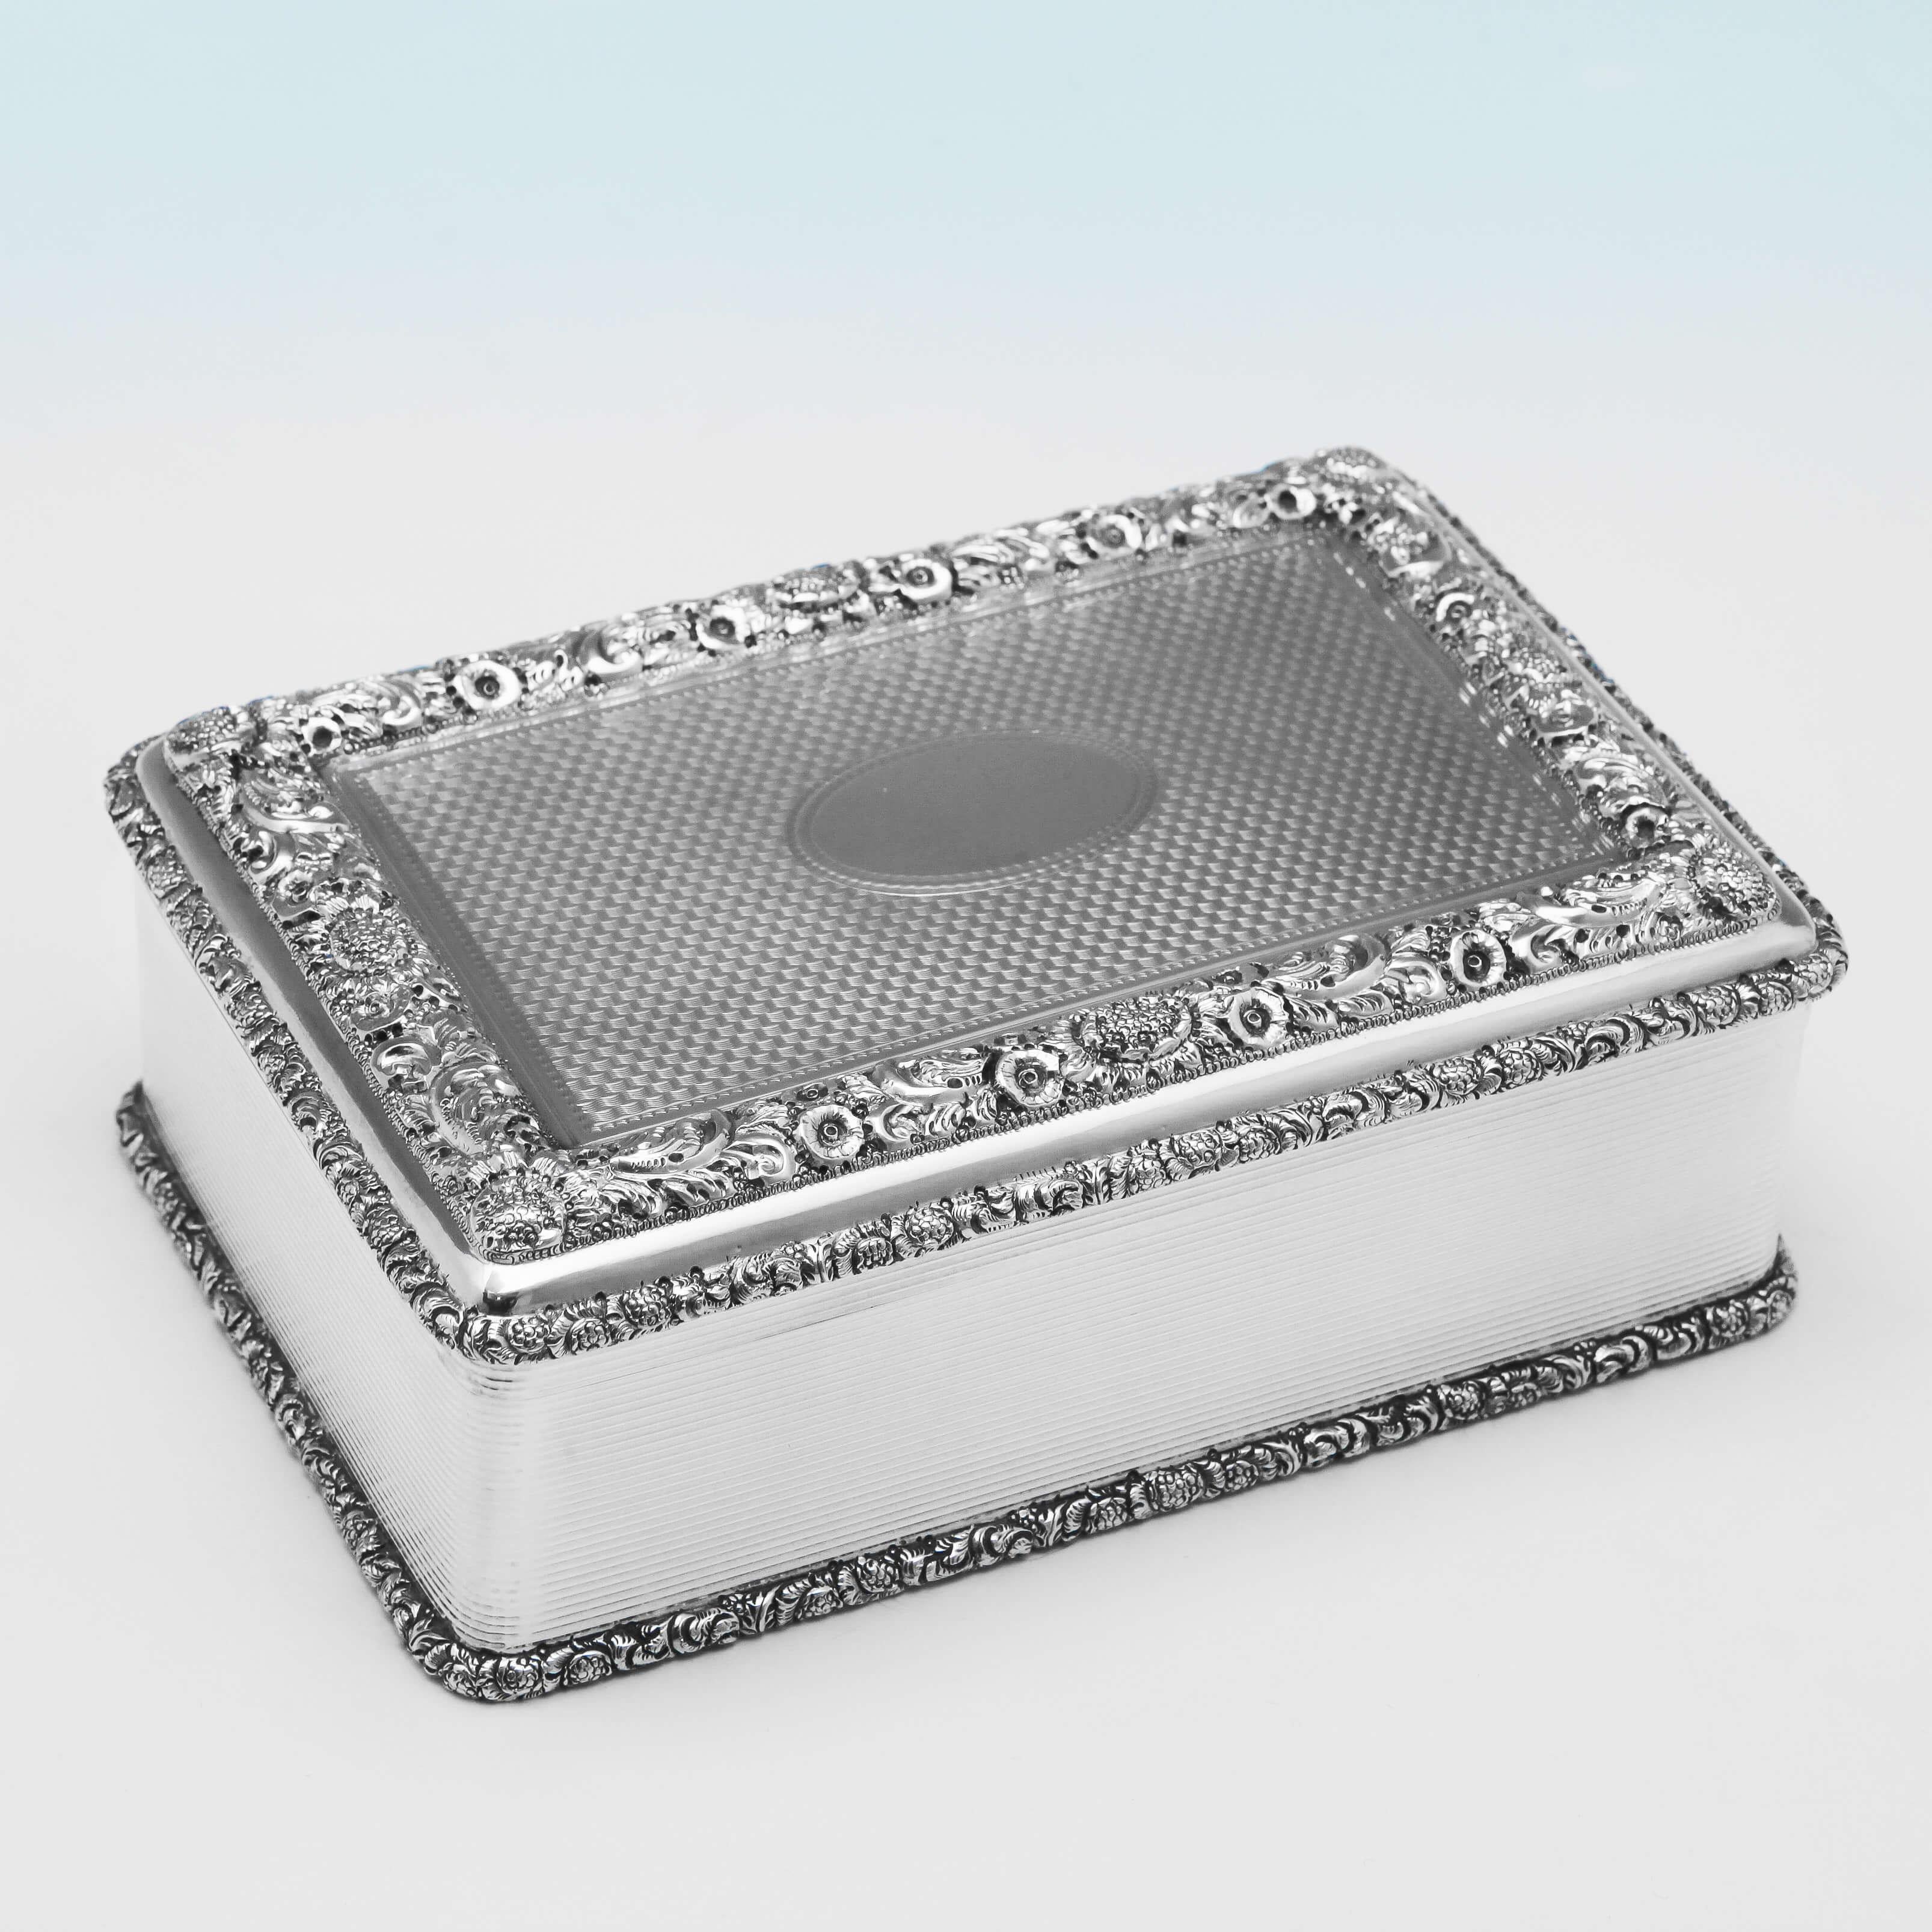 English Antique Sterling Silver Table Snuff Box from 1911 by D. & J. Wellby For Sale